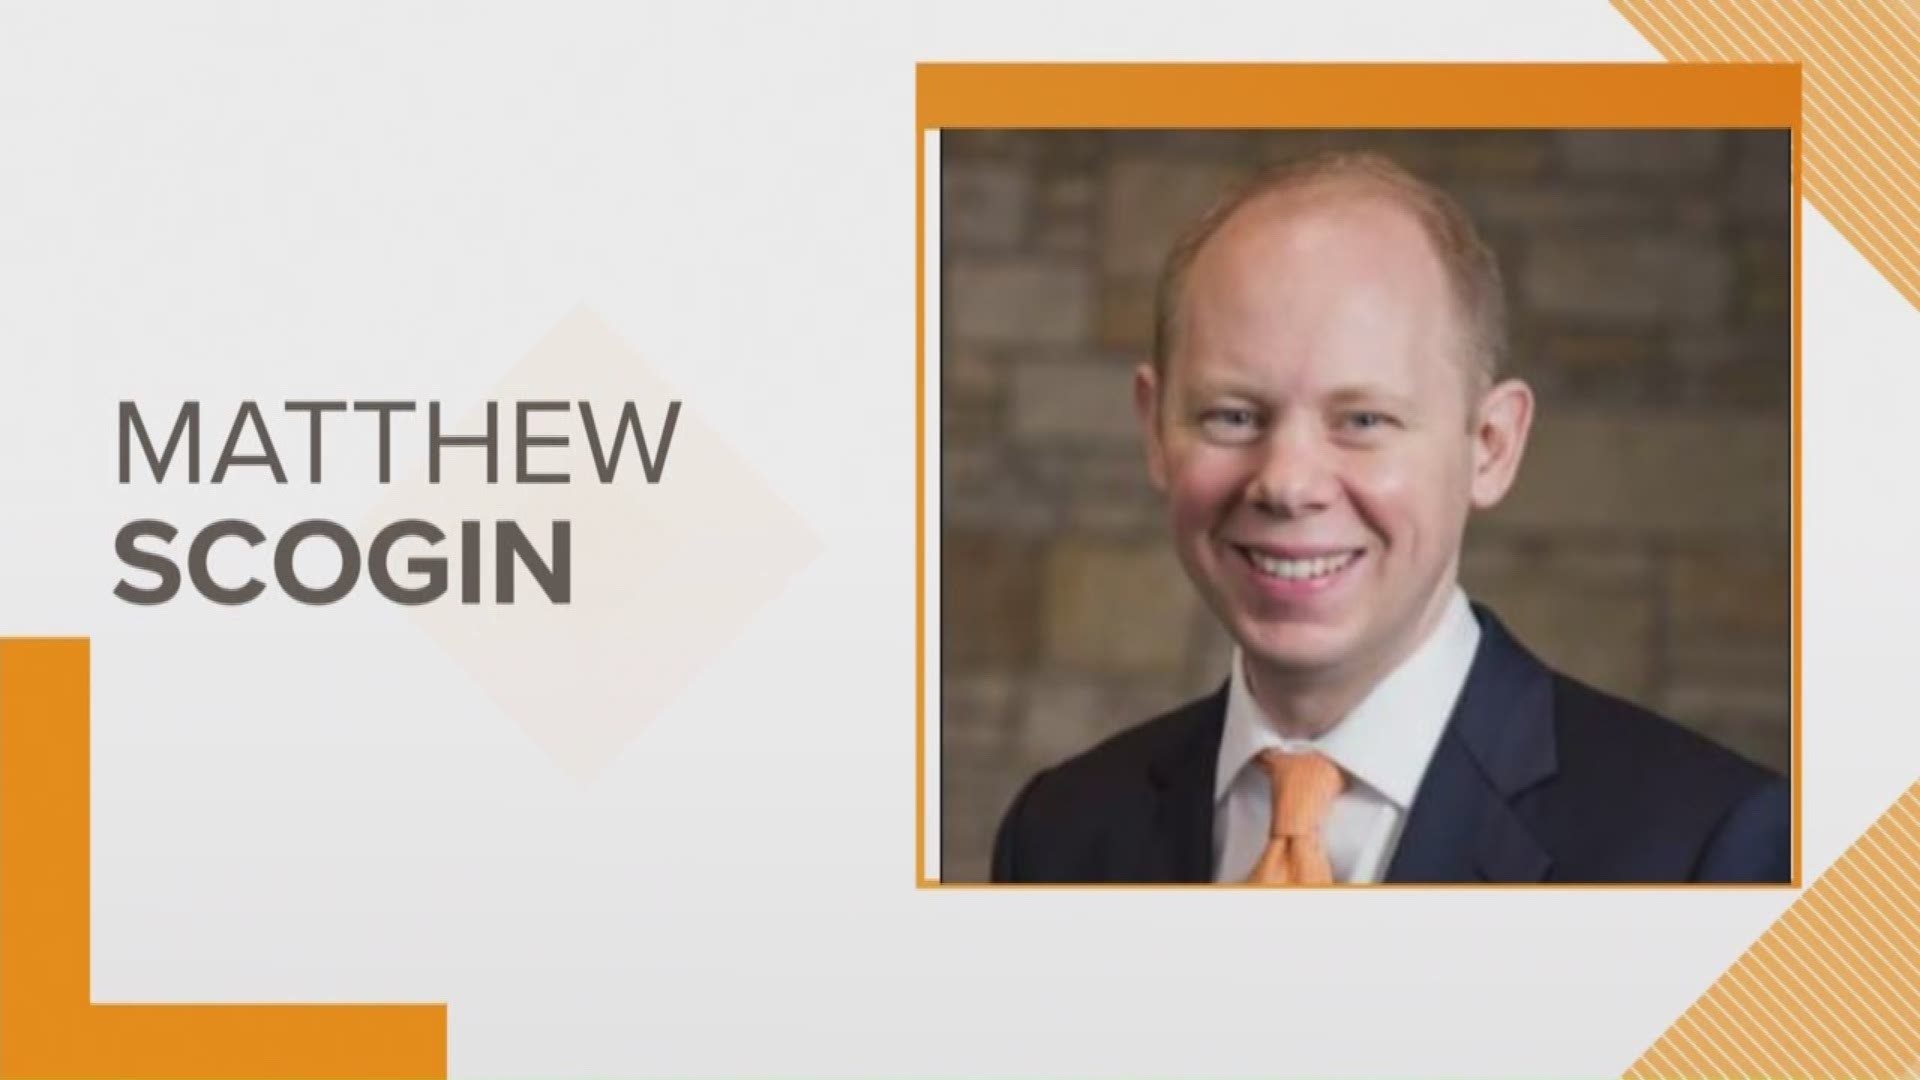 Matthew Scogin has been announced as Hope College's next president.